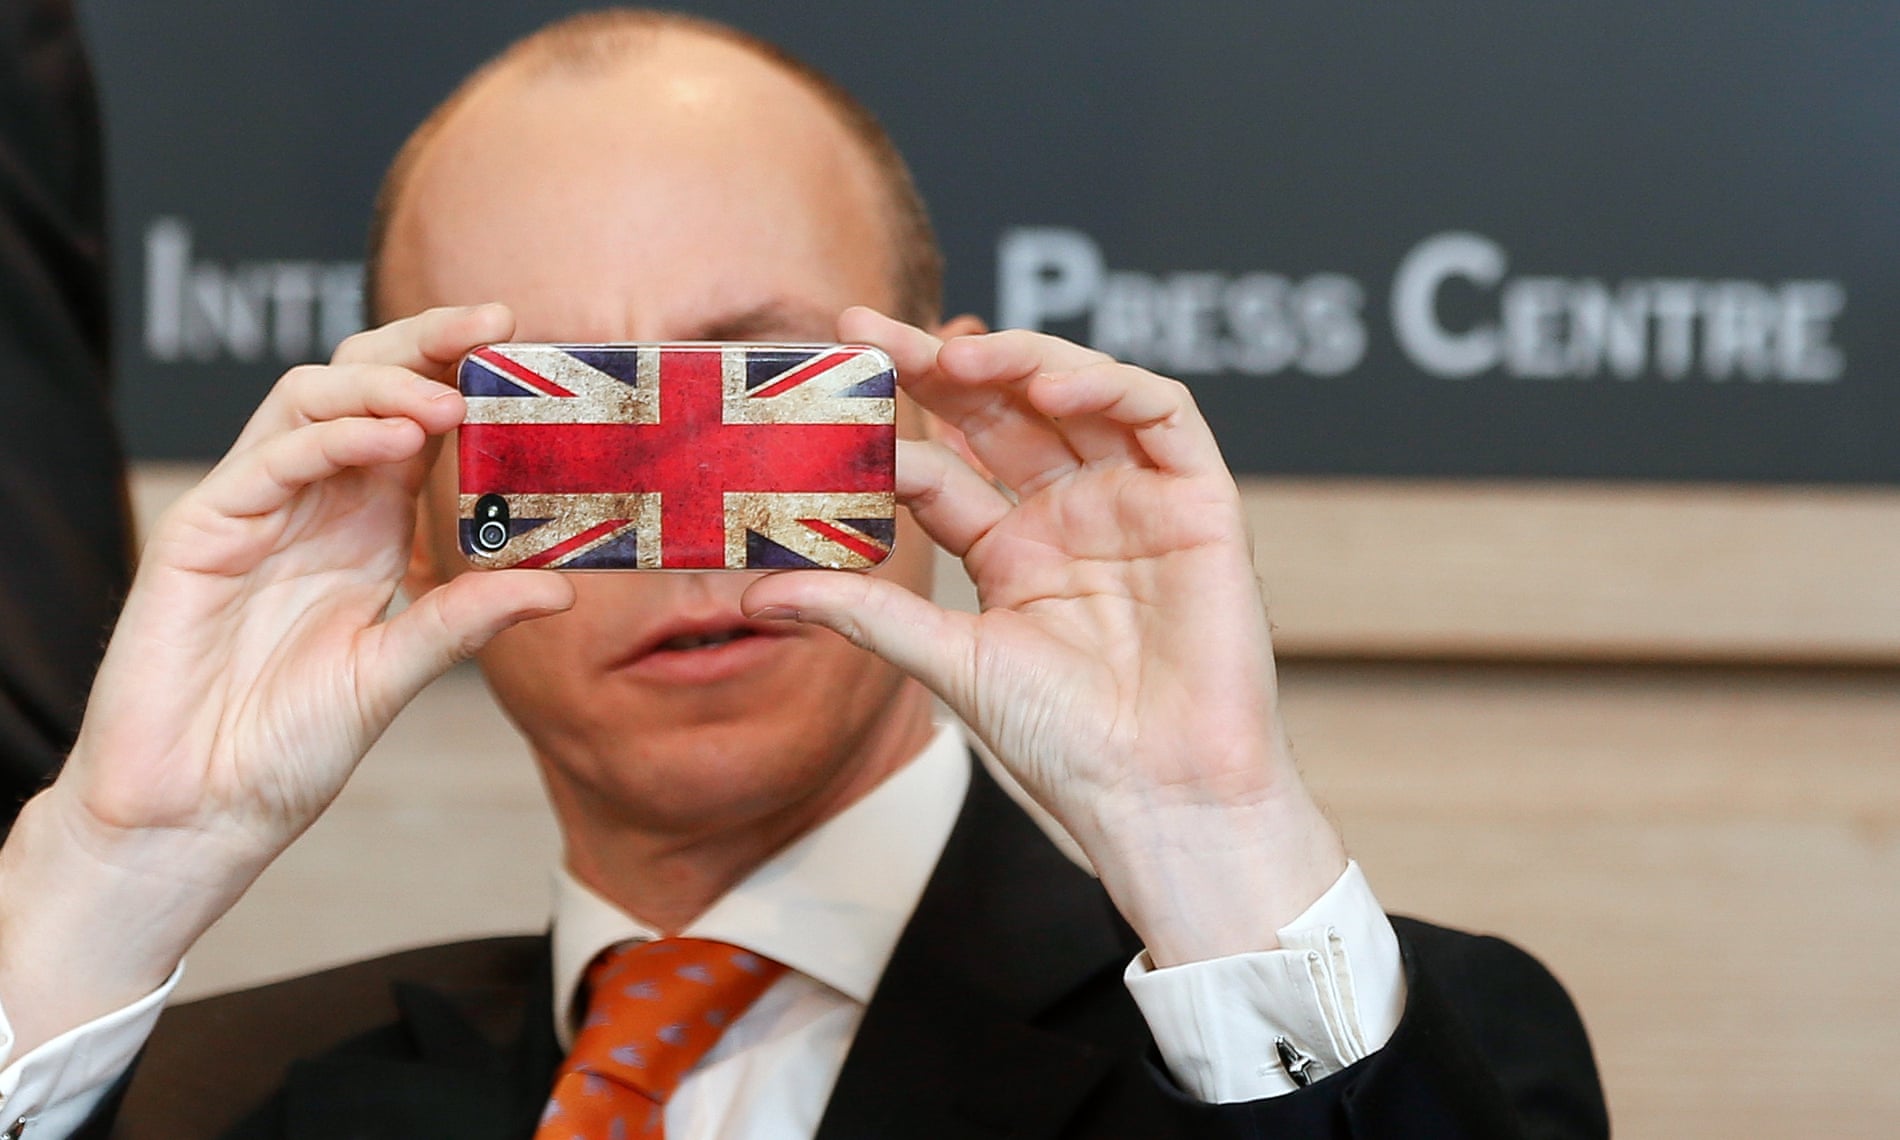 Daniel Hannan takes a picture with his smartphone during a press conference of the Alliance of European Conservatives and Reformists in Brussels